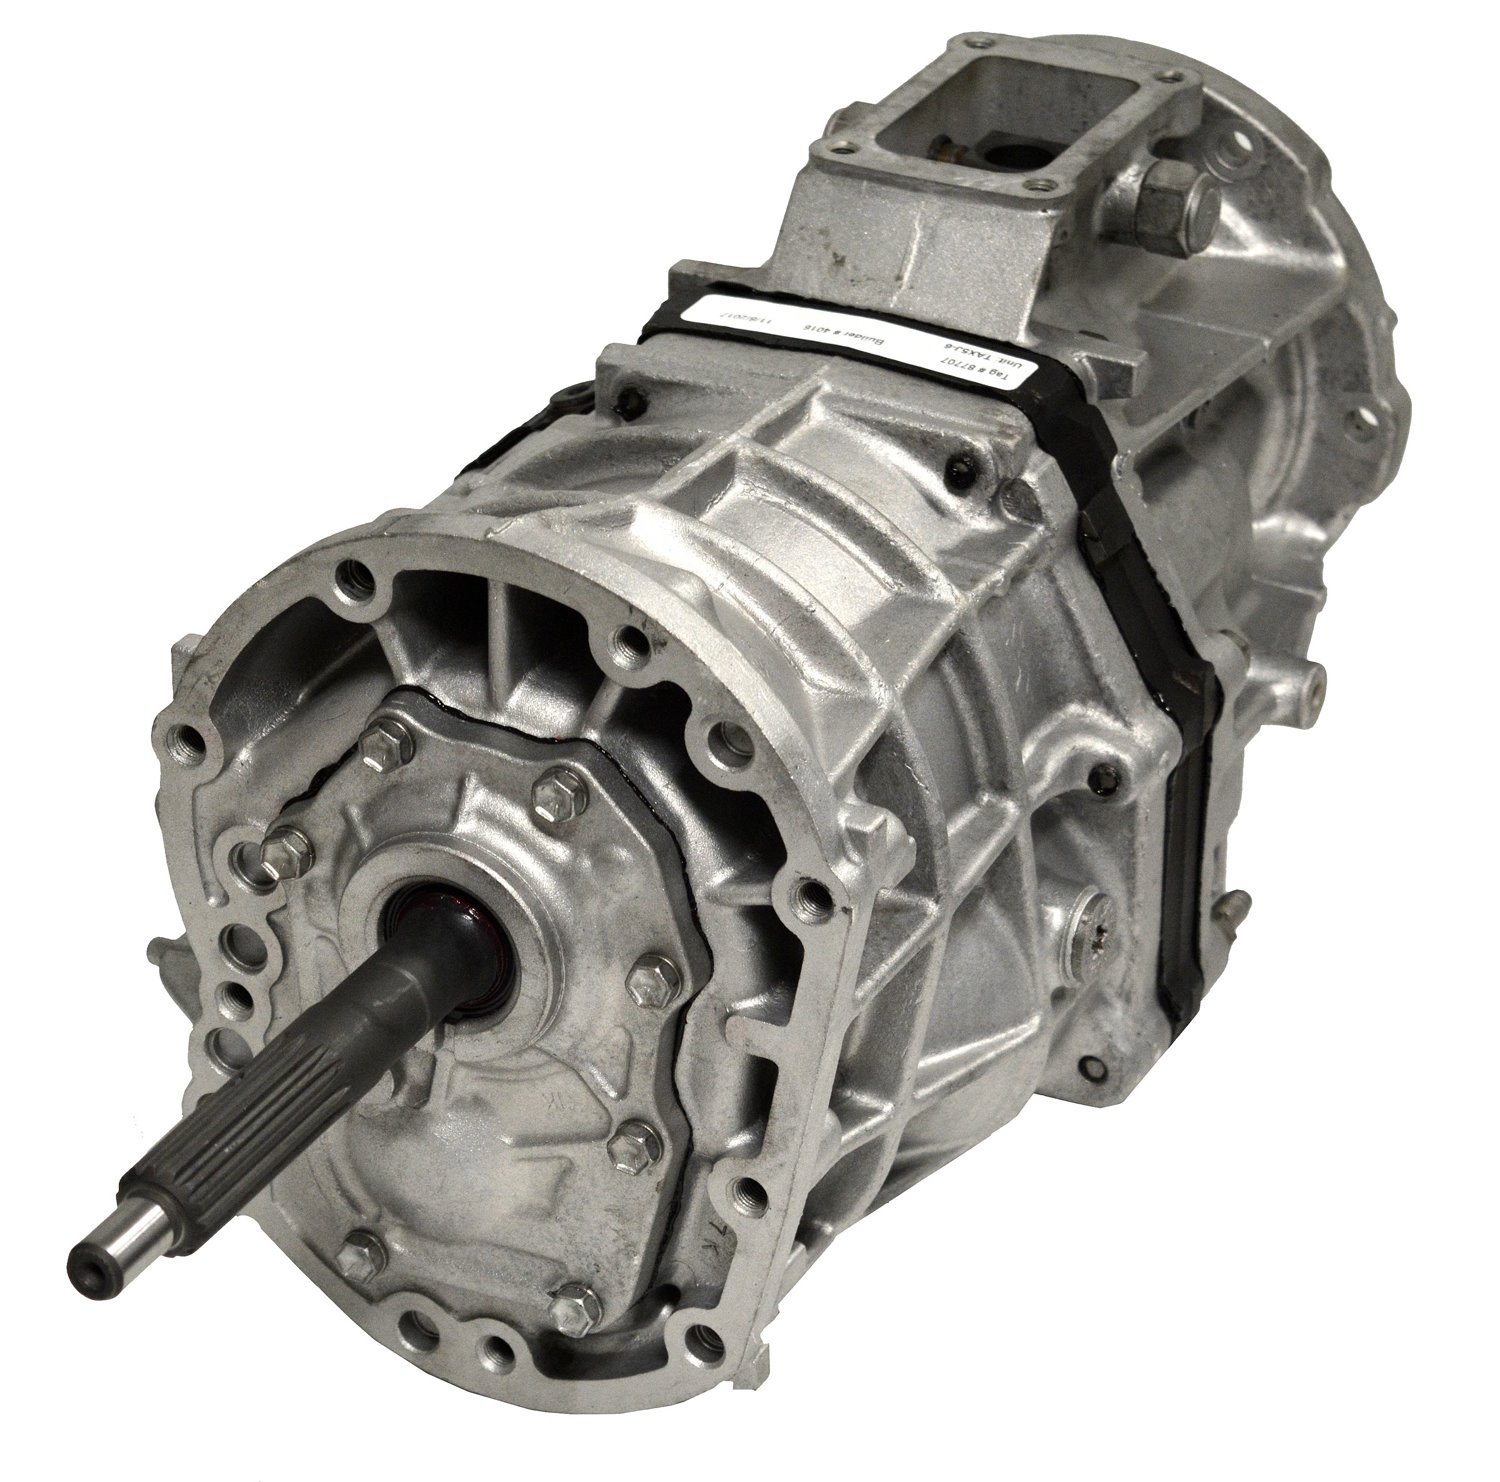 Remanufactured AX5 Manual Transmission for Jeep 1984-1986, 5-Speed